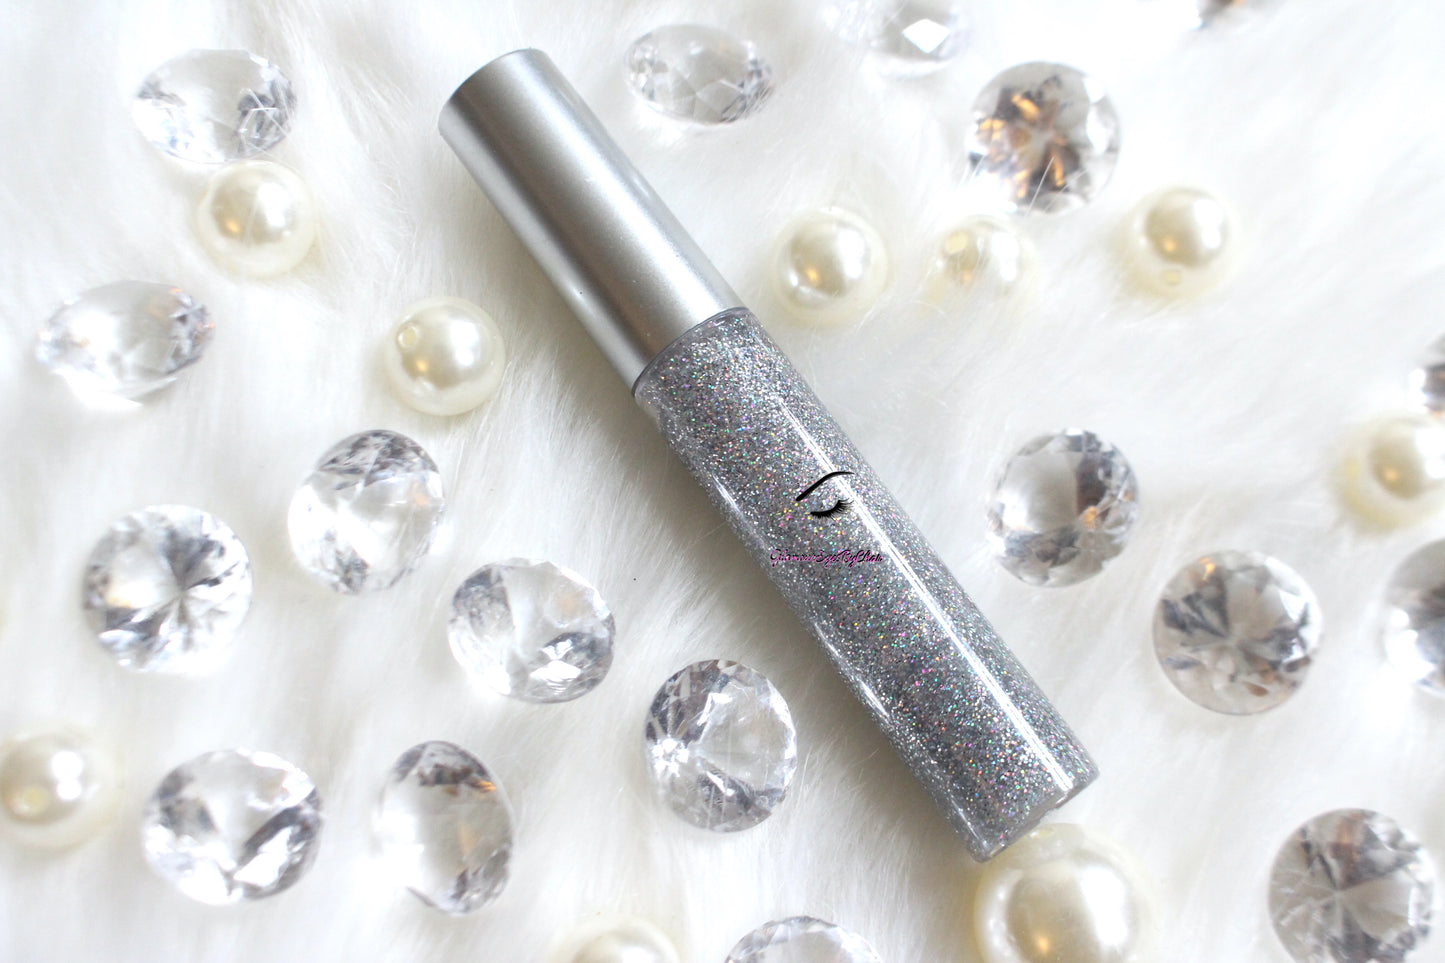 Princess Cut is a clear hydrating gloss with extra fine silver holographic glitter. This gloss is also vegan, gluten-free, high shine, smooth and long lasting. It's made with premium rich ingredients to keep your lips soft, moisturized and luscious without feeling sticky. Princess Cut is available in a squeeze tube and a wand tube (doe foot applicator) for a more precise application.